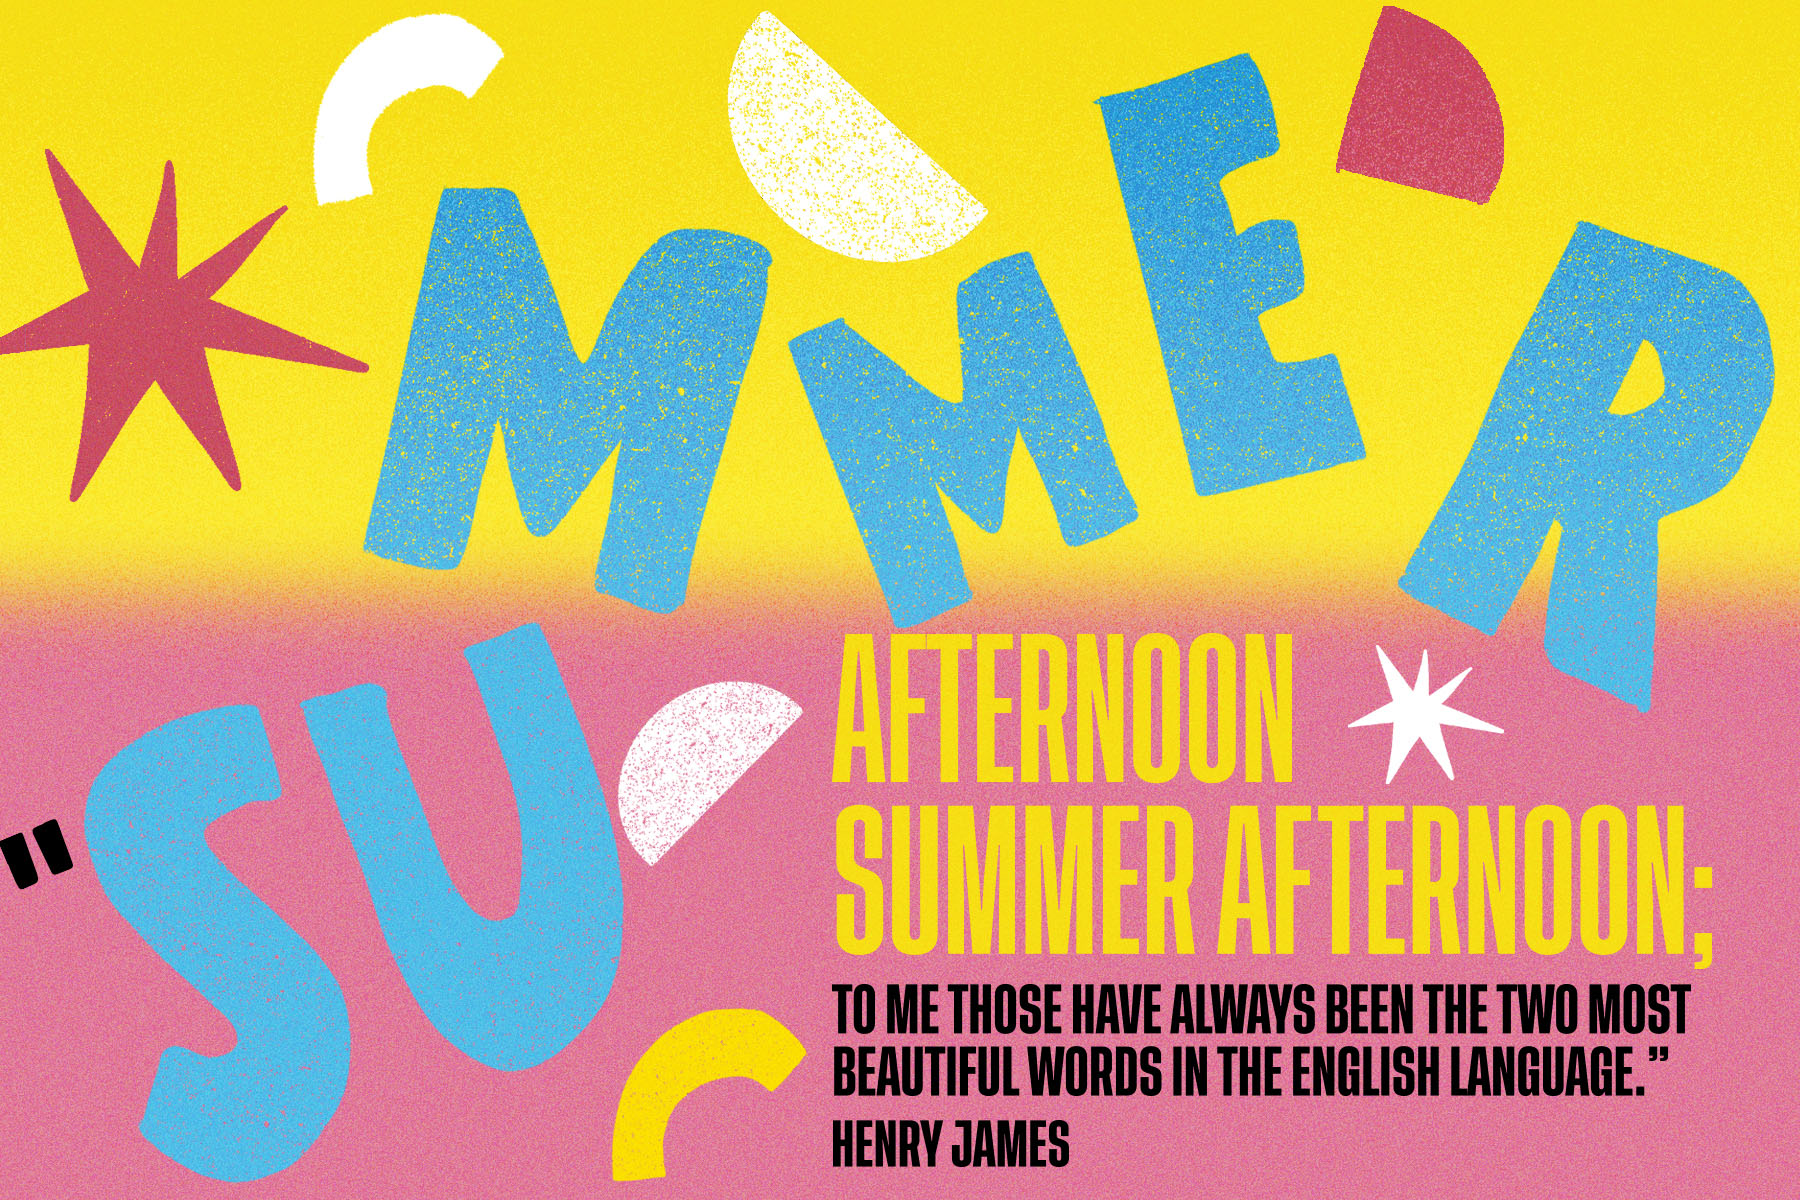 A bright, colourful image featuring the Henry James quote, “Summer afternoon – summer afternoon; to me those have always been the two most beautiful words in the English language.”